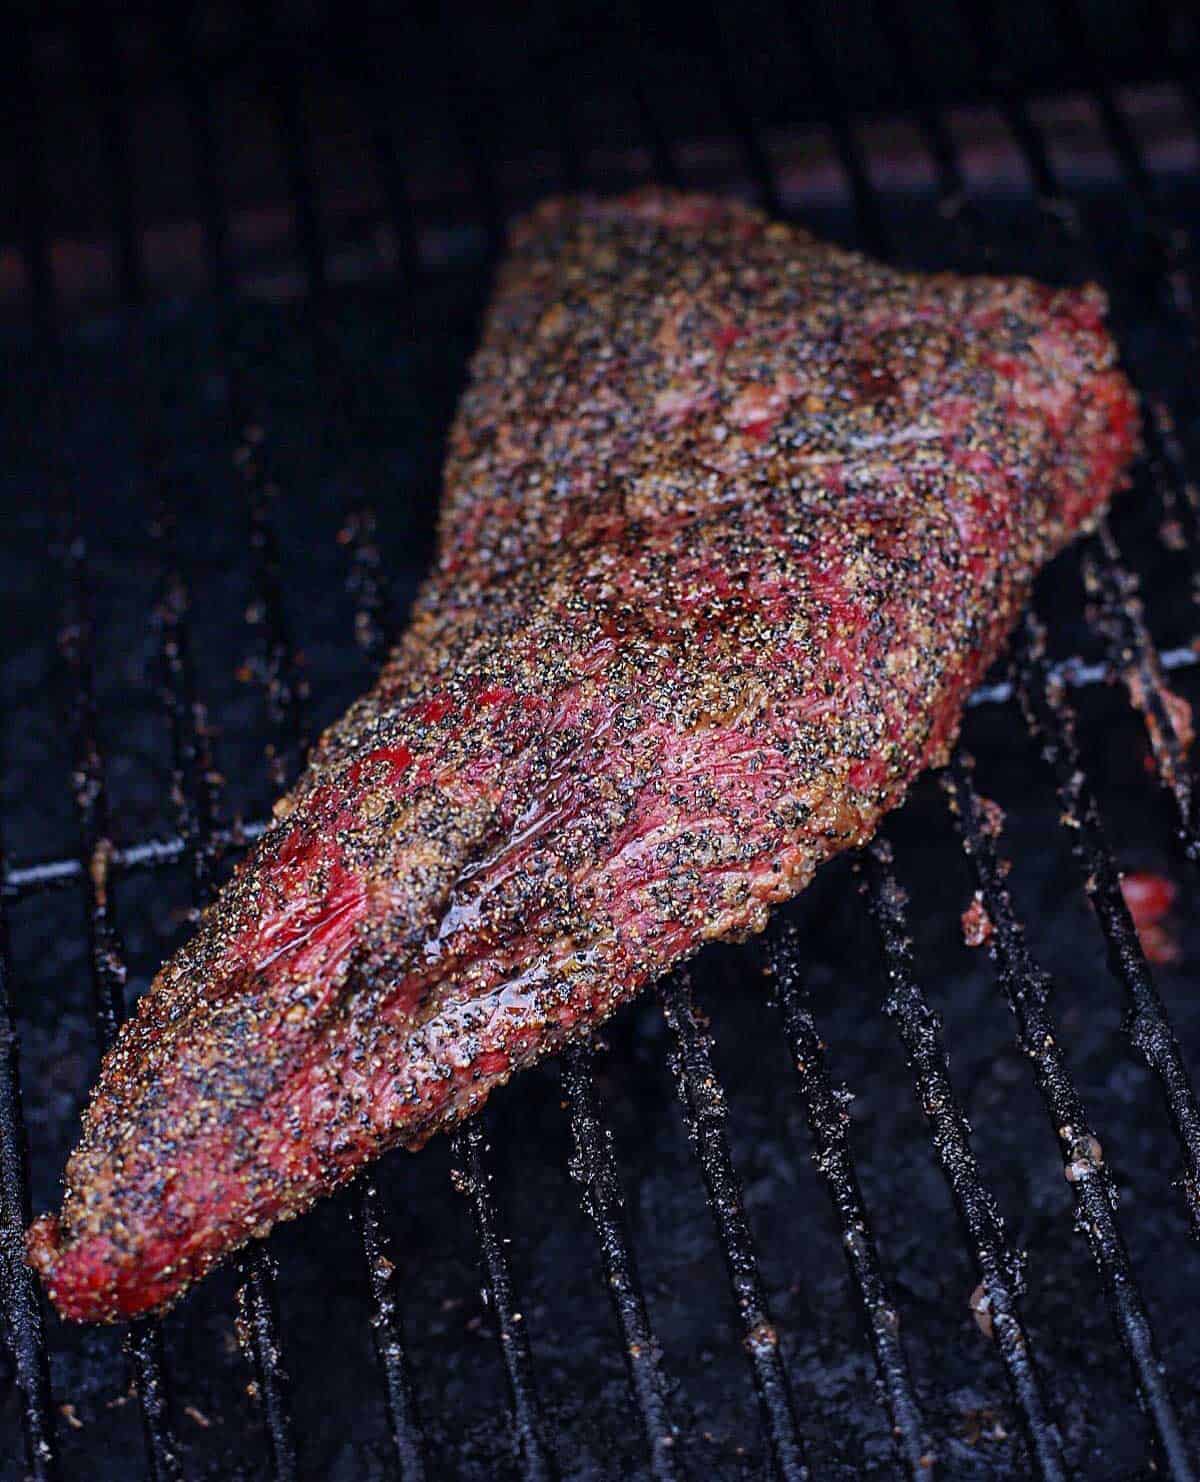 https://www.vindulge.com/wp-content/uploads/2022/04/Smoked-Tri-Tip-on-the-grill.jpg